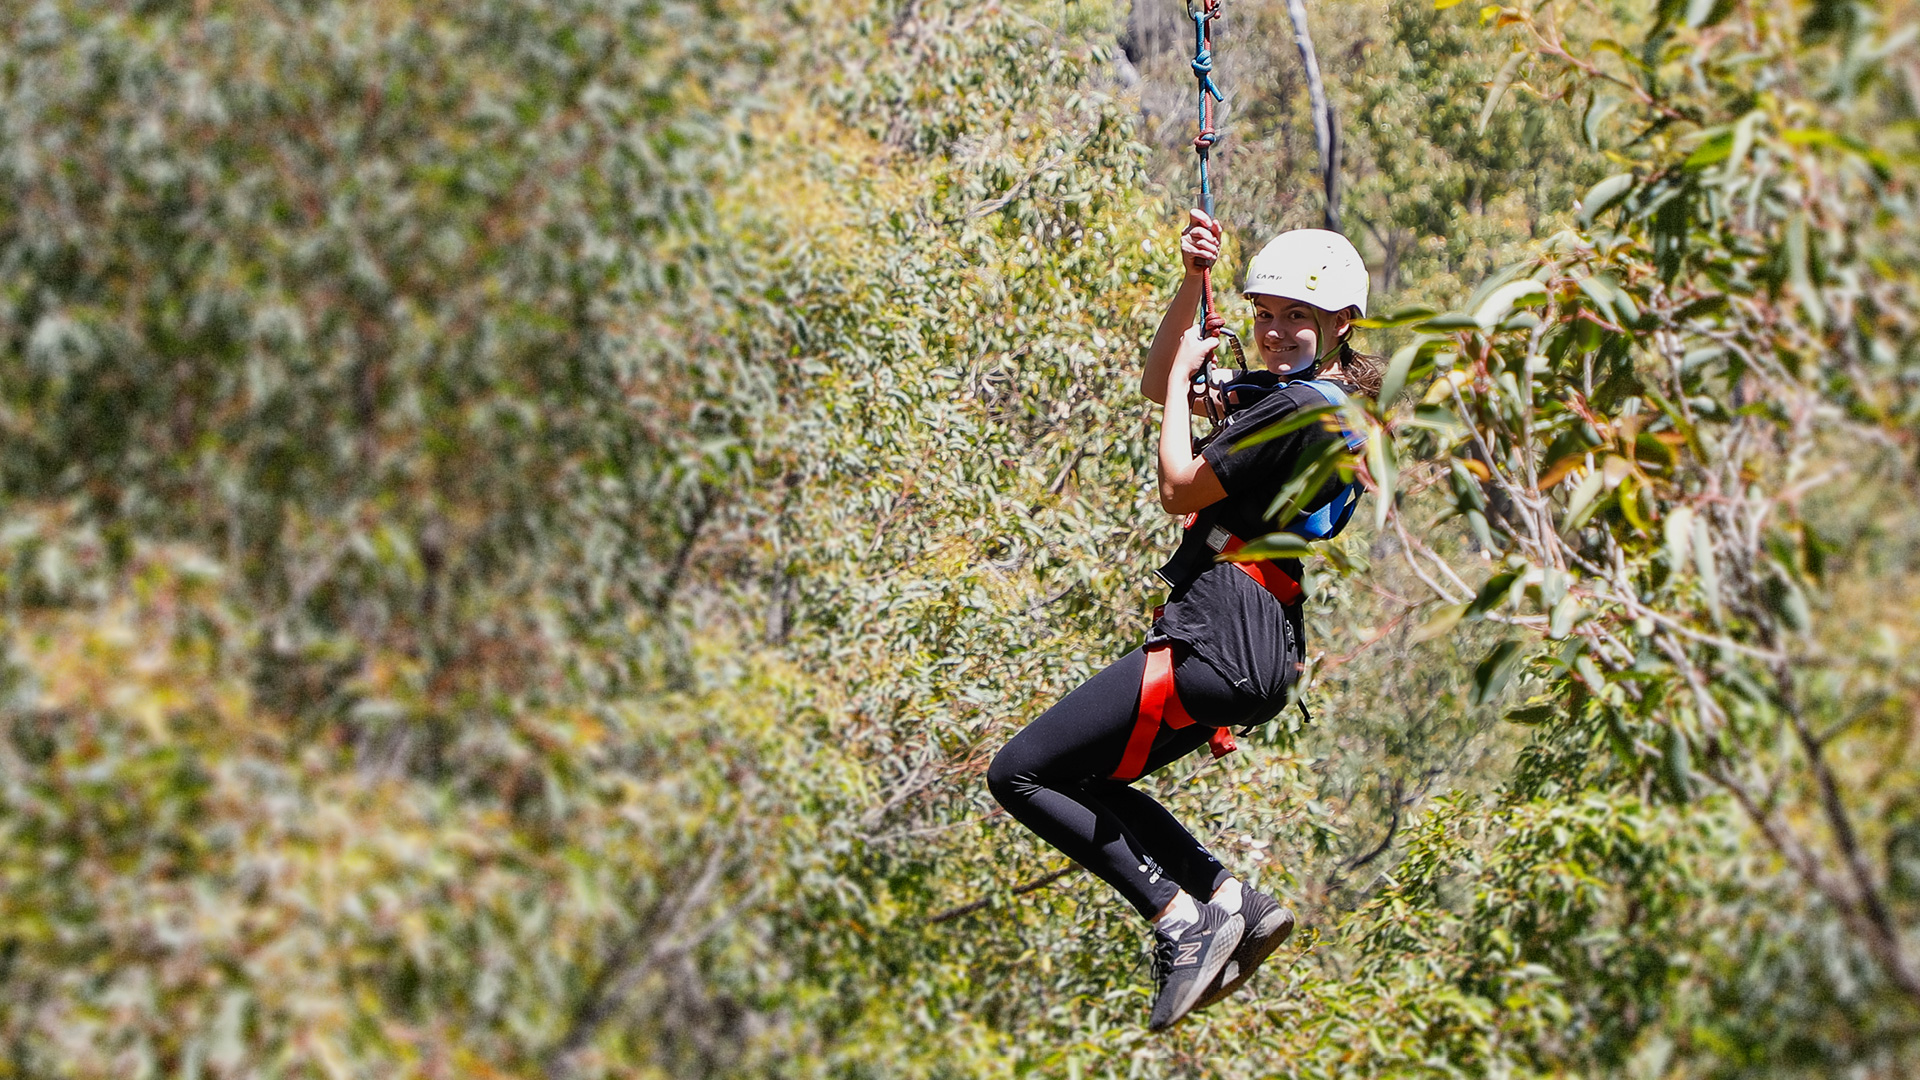 Pictured is a young girl on a flying fox suspended mid air. Surrounding her is greenery.